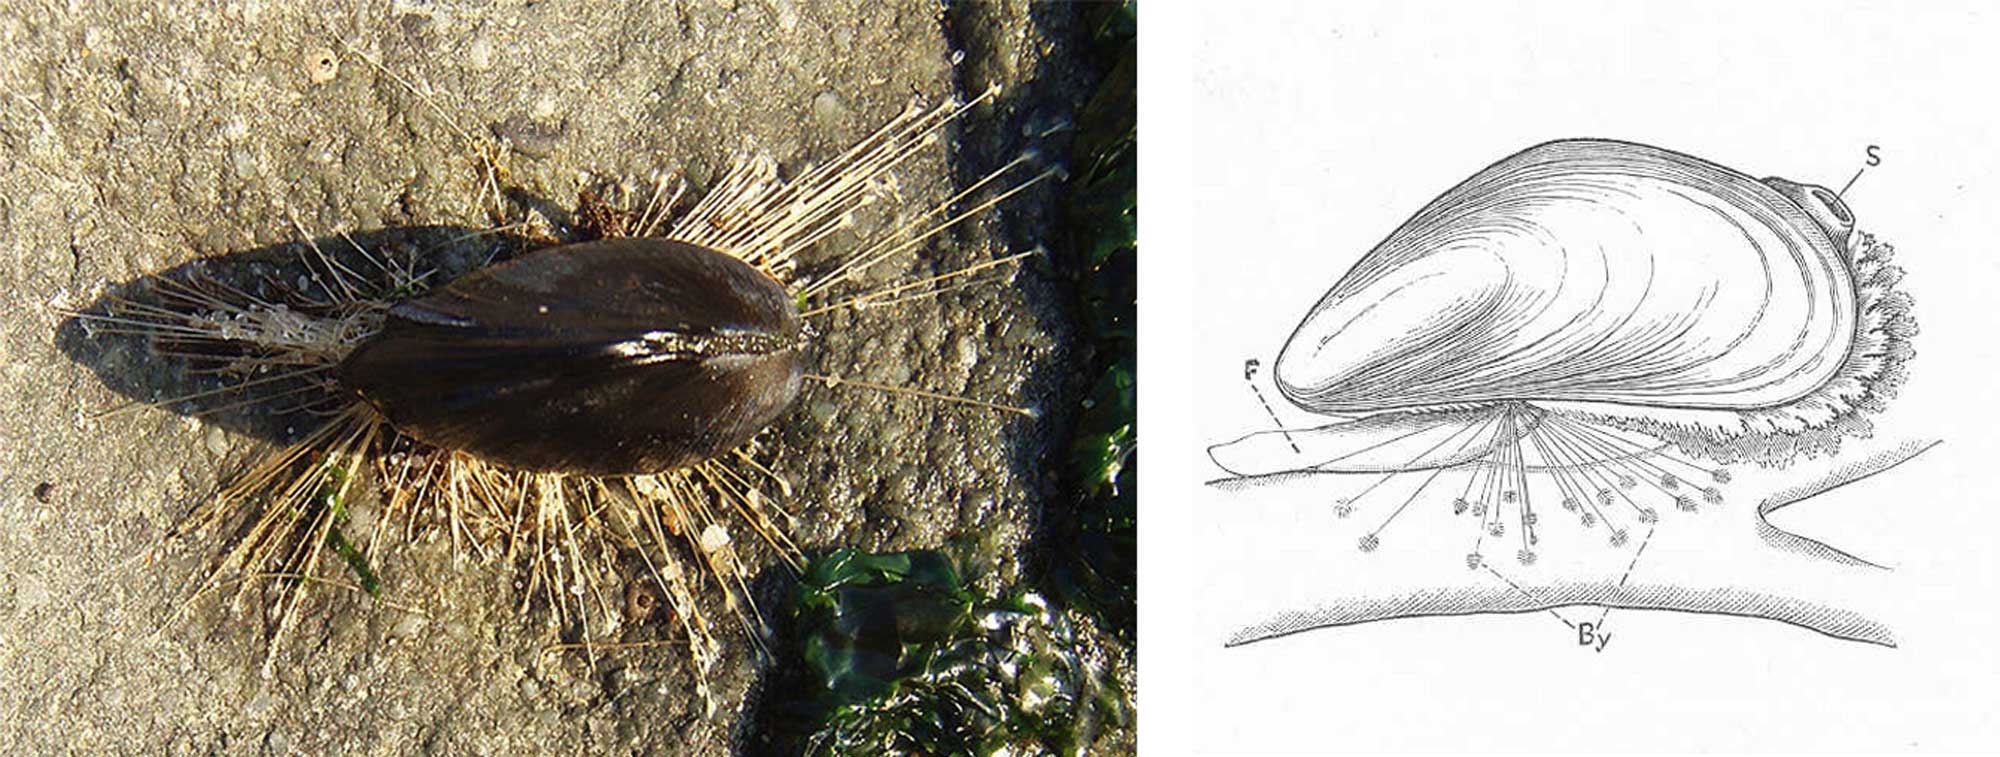 Image showing a photograph and drawing of bivalves attached to hard substrates with byssal threads.